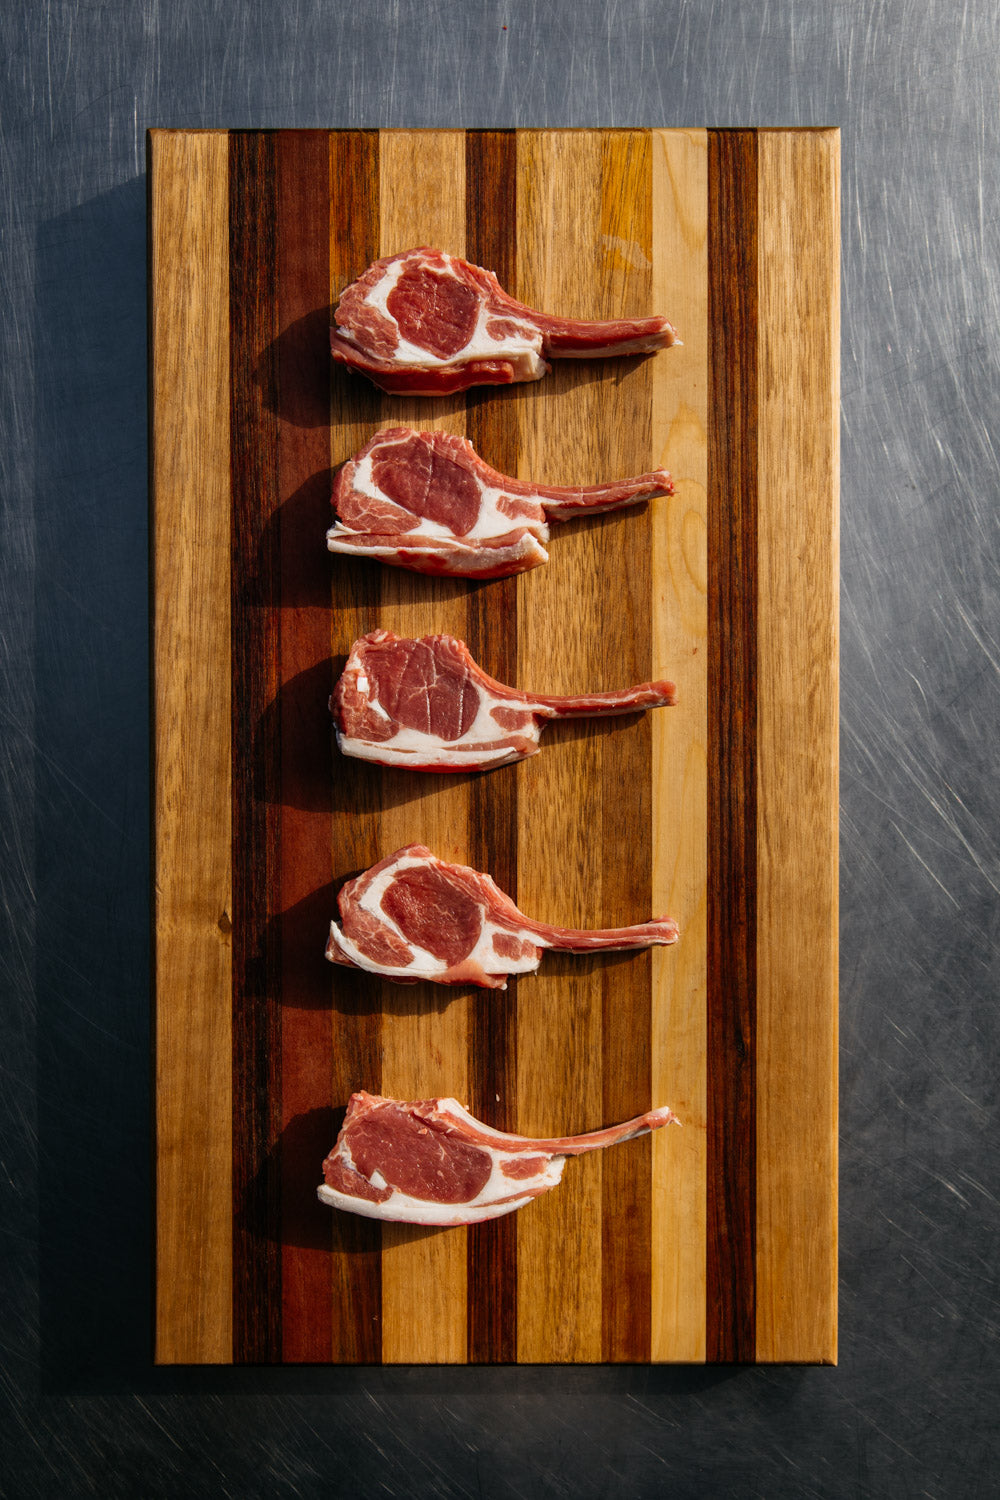 This week's special; Lamb Cutlets